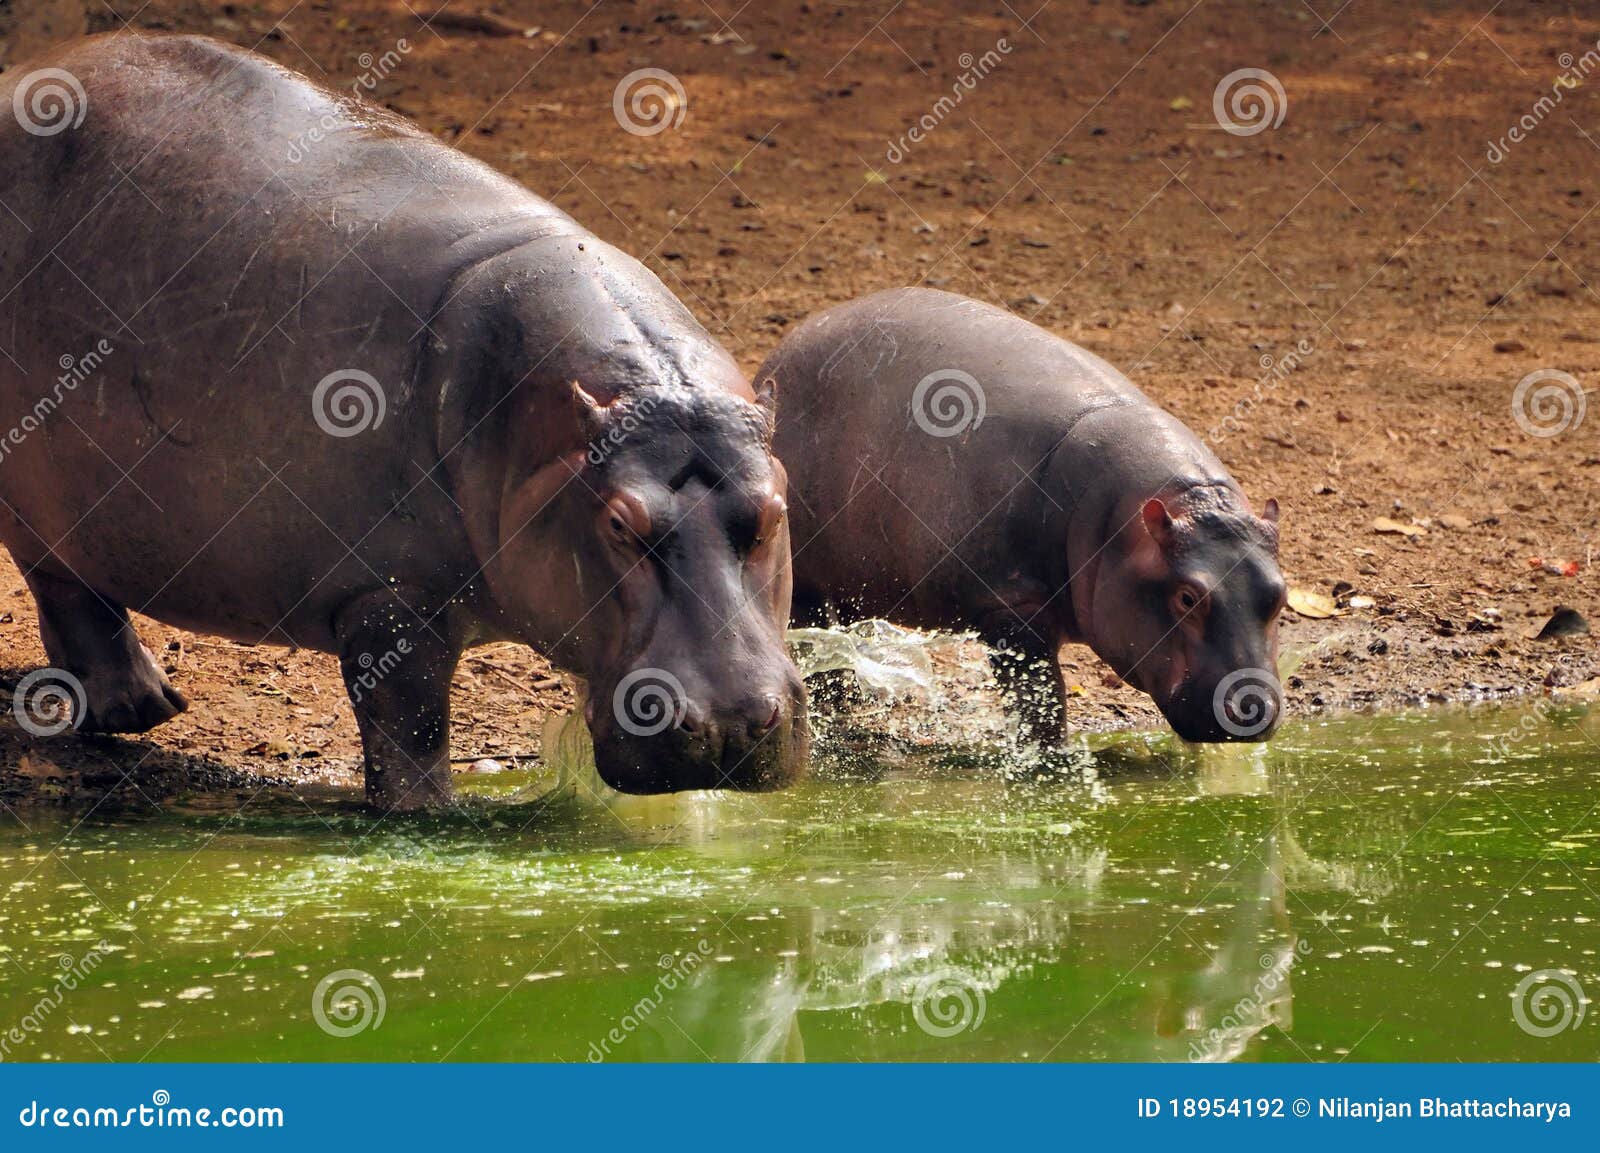 hippo baby with mother